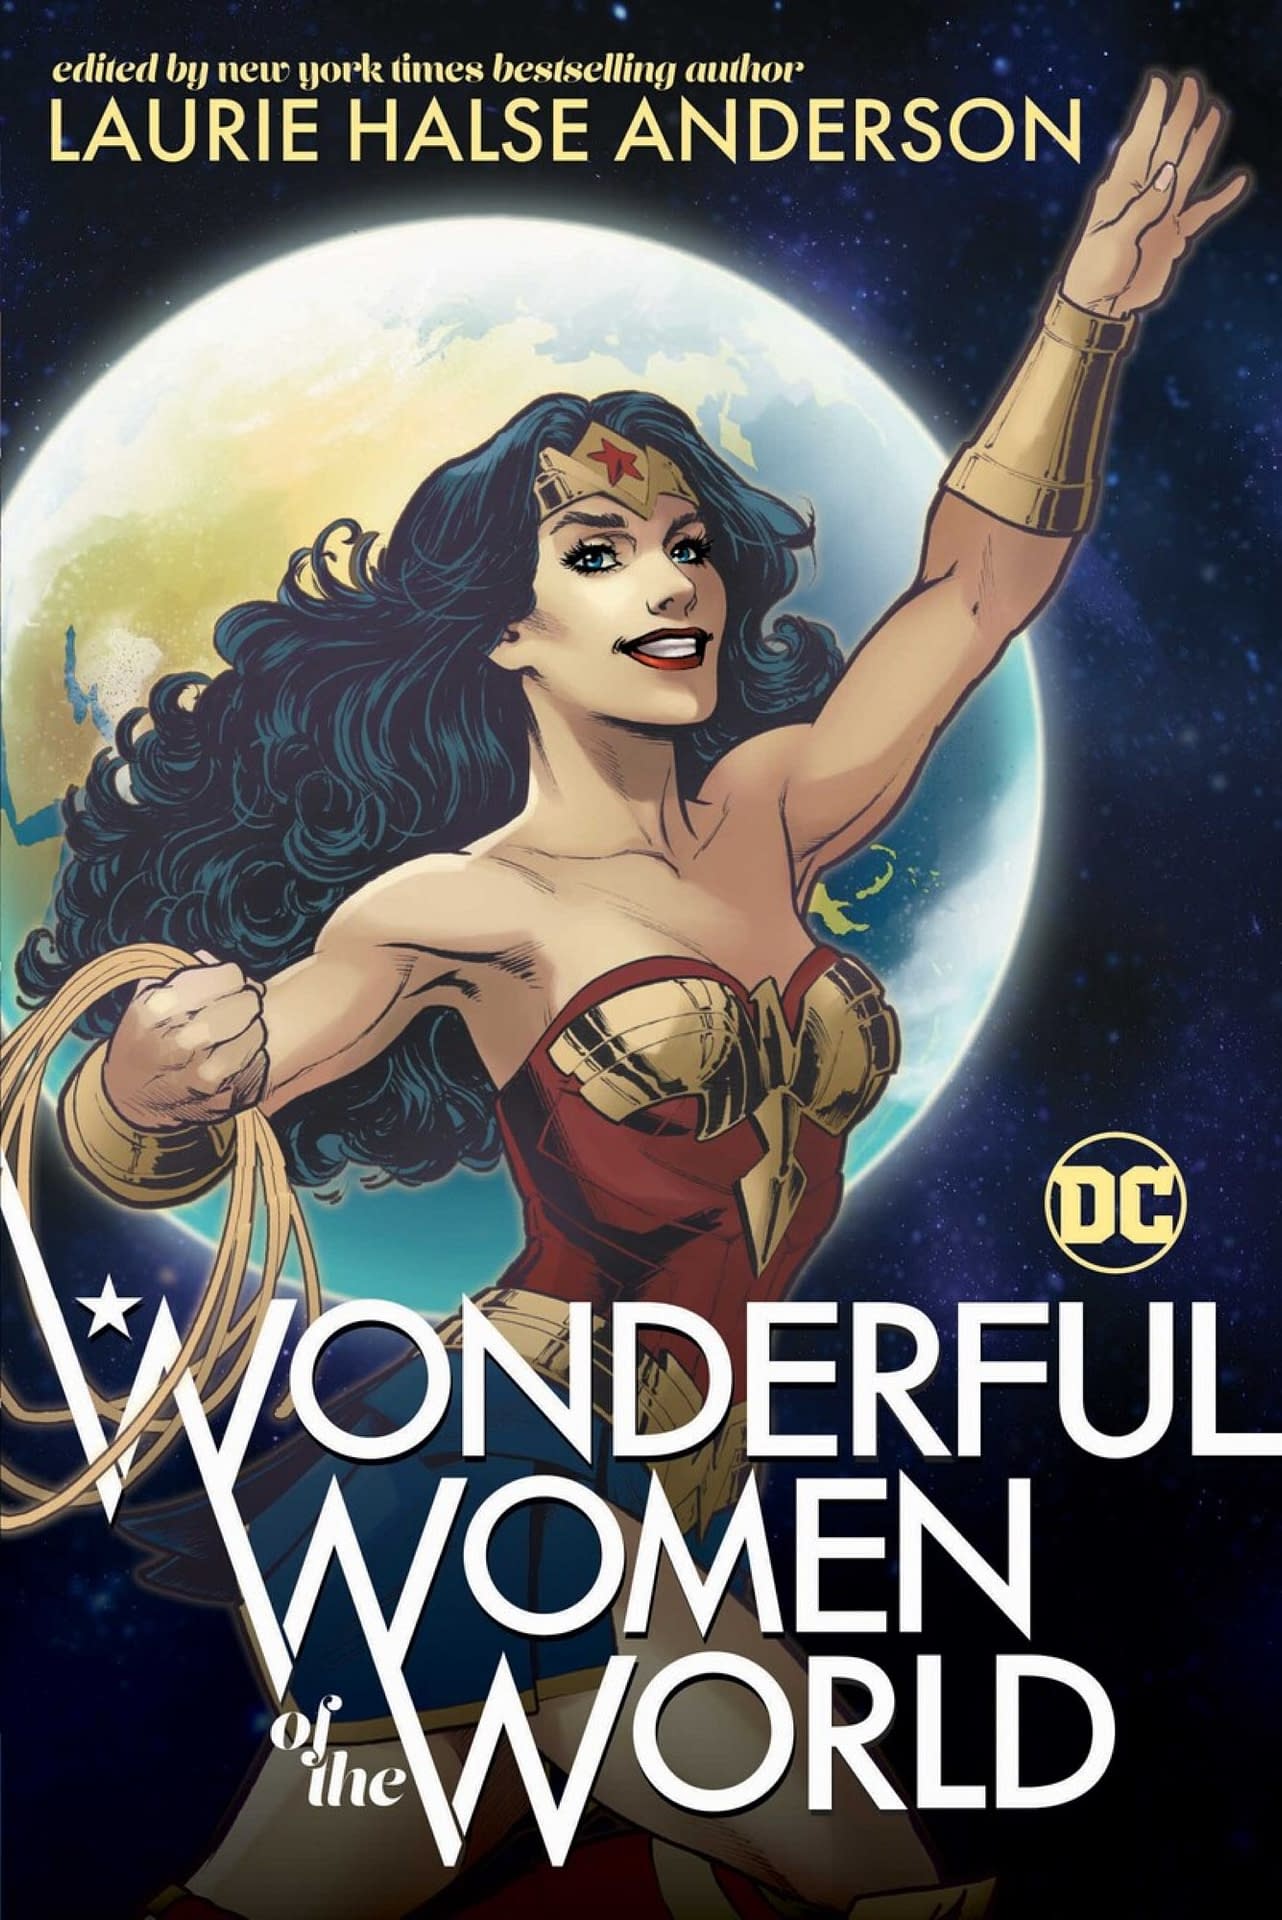 DC Publishes 12 Wonder Woman Comics In October For 80th Anniversary